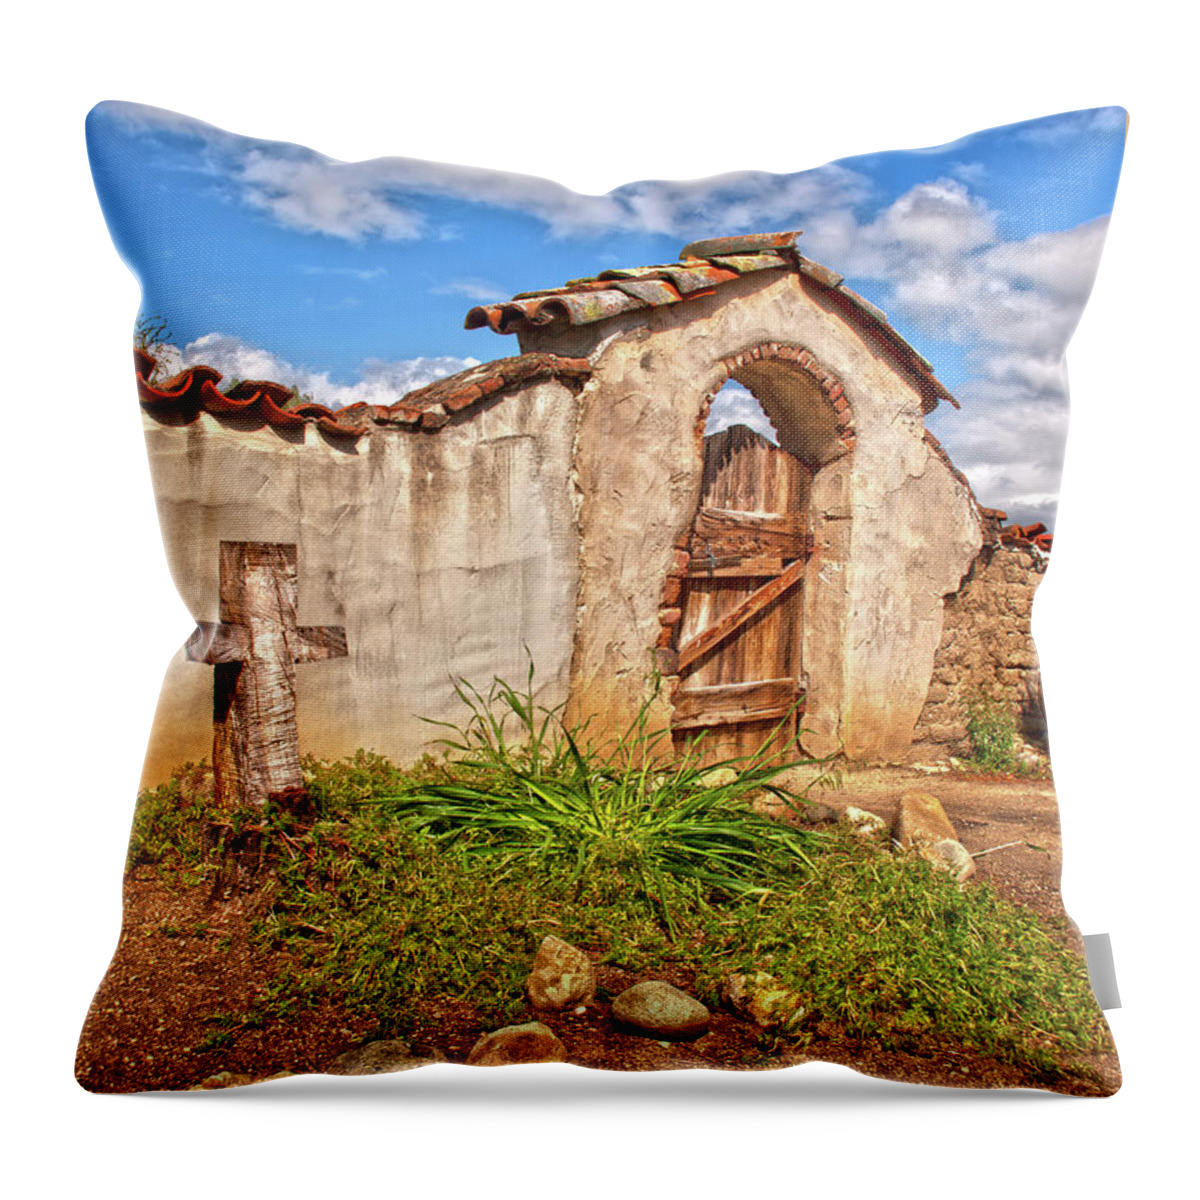 California Missions Throw Pillow featuring the photograph The North Gate - Mission San Miguel Arcangel, California by Denise Strahm